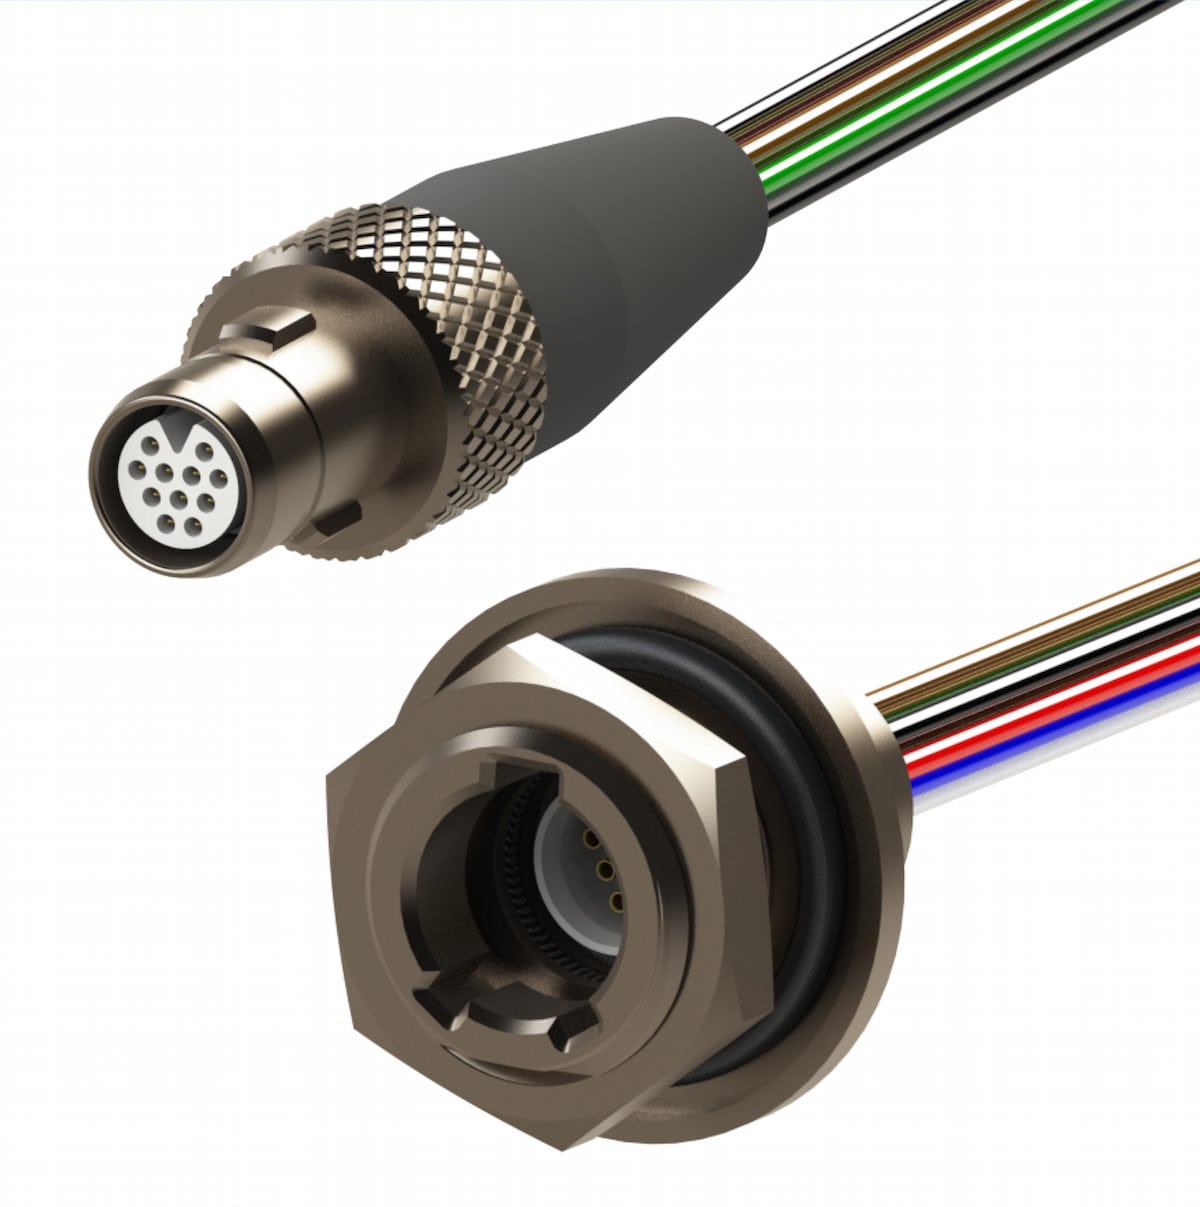 Omnetics Connector Corporation’s rugged Nano 360® Circulars Breakaway Panel-Mount Discrete Wire/Cable Connectors